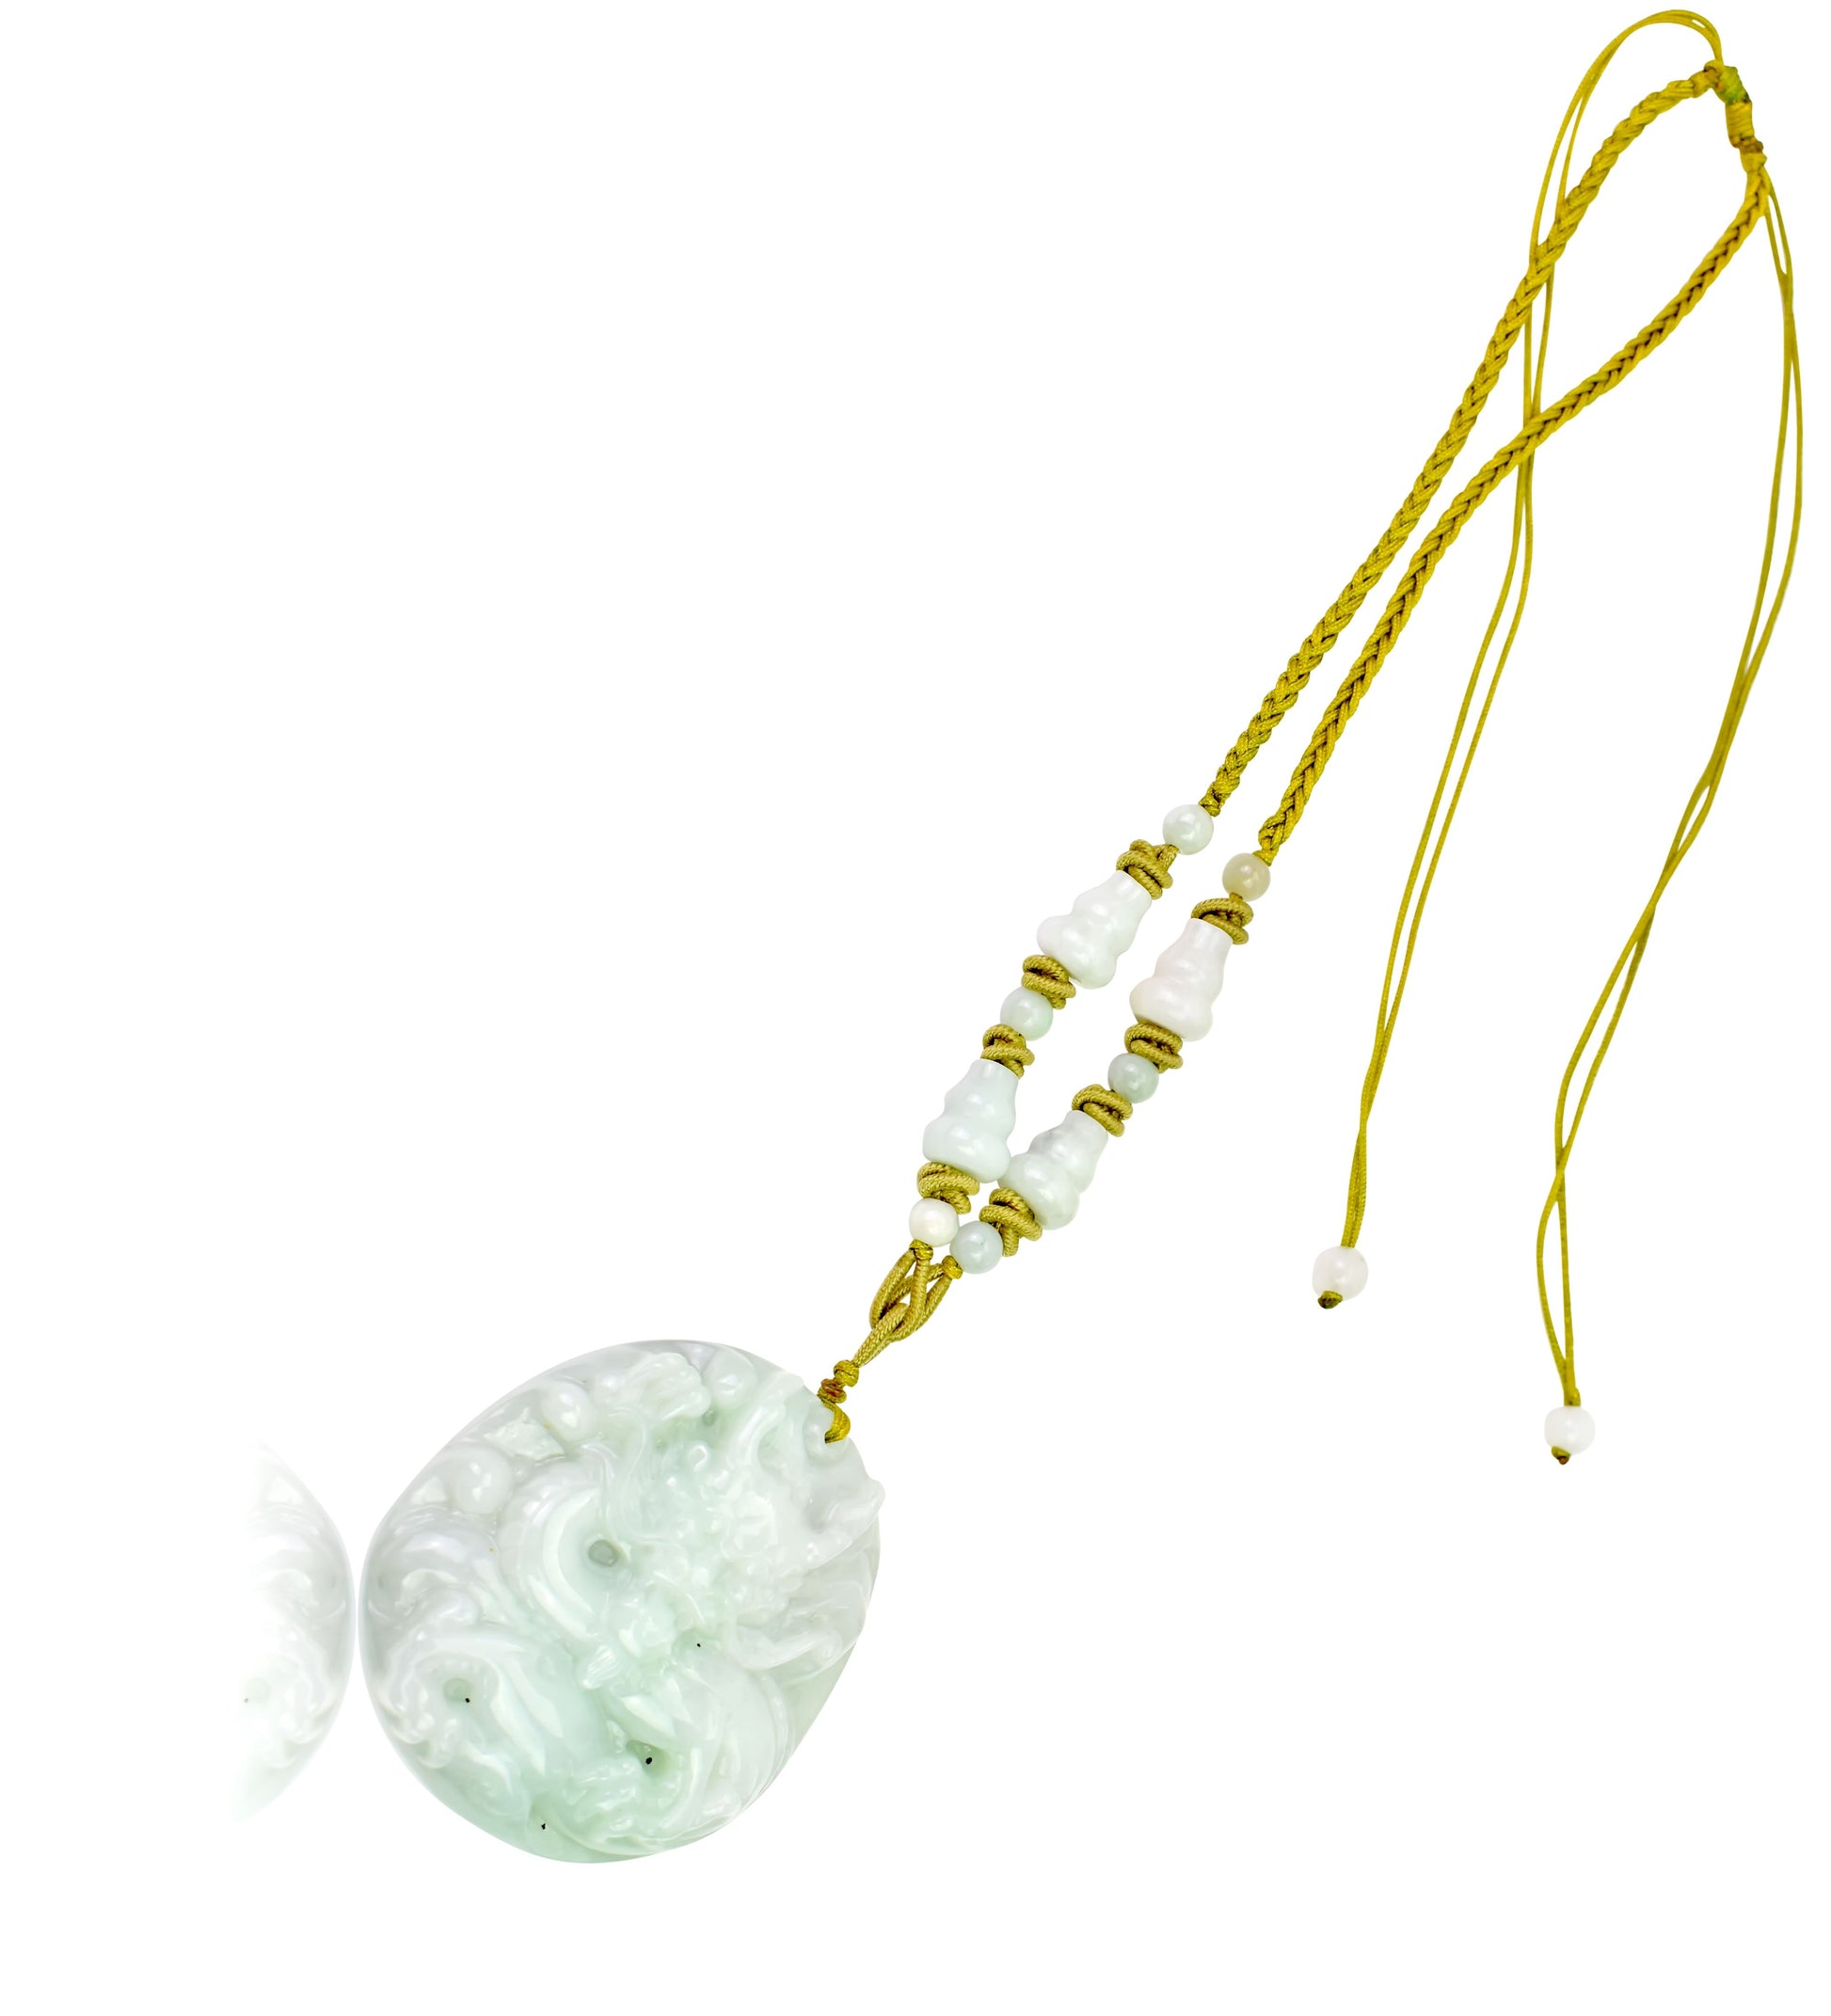 Be Bold and Confident with the Chinese Dragon Carving jade Necklace